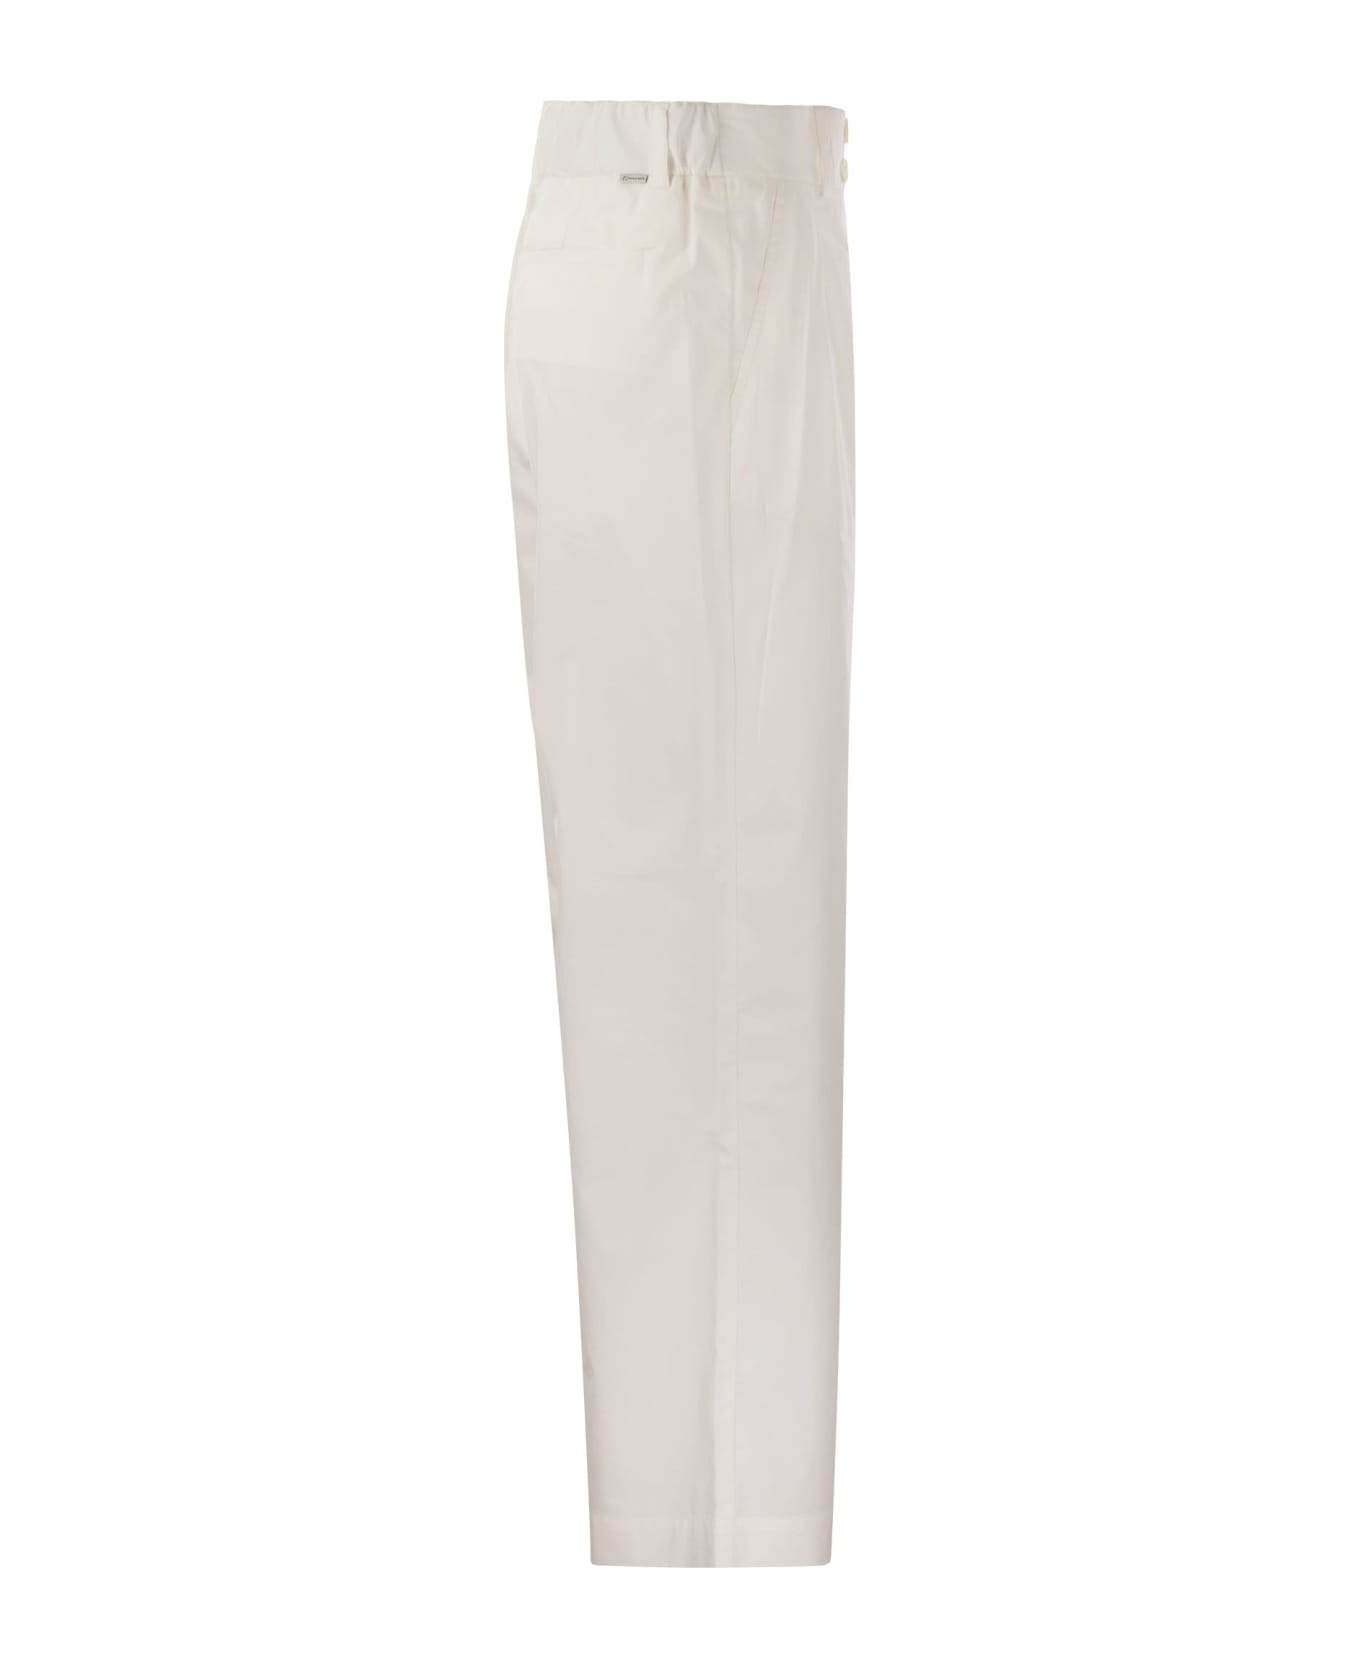 Woolrich Cotton Pleated Trousers - White ボトムス